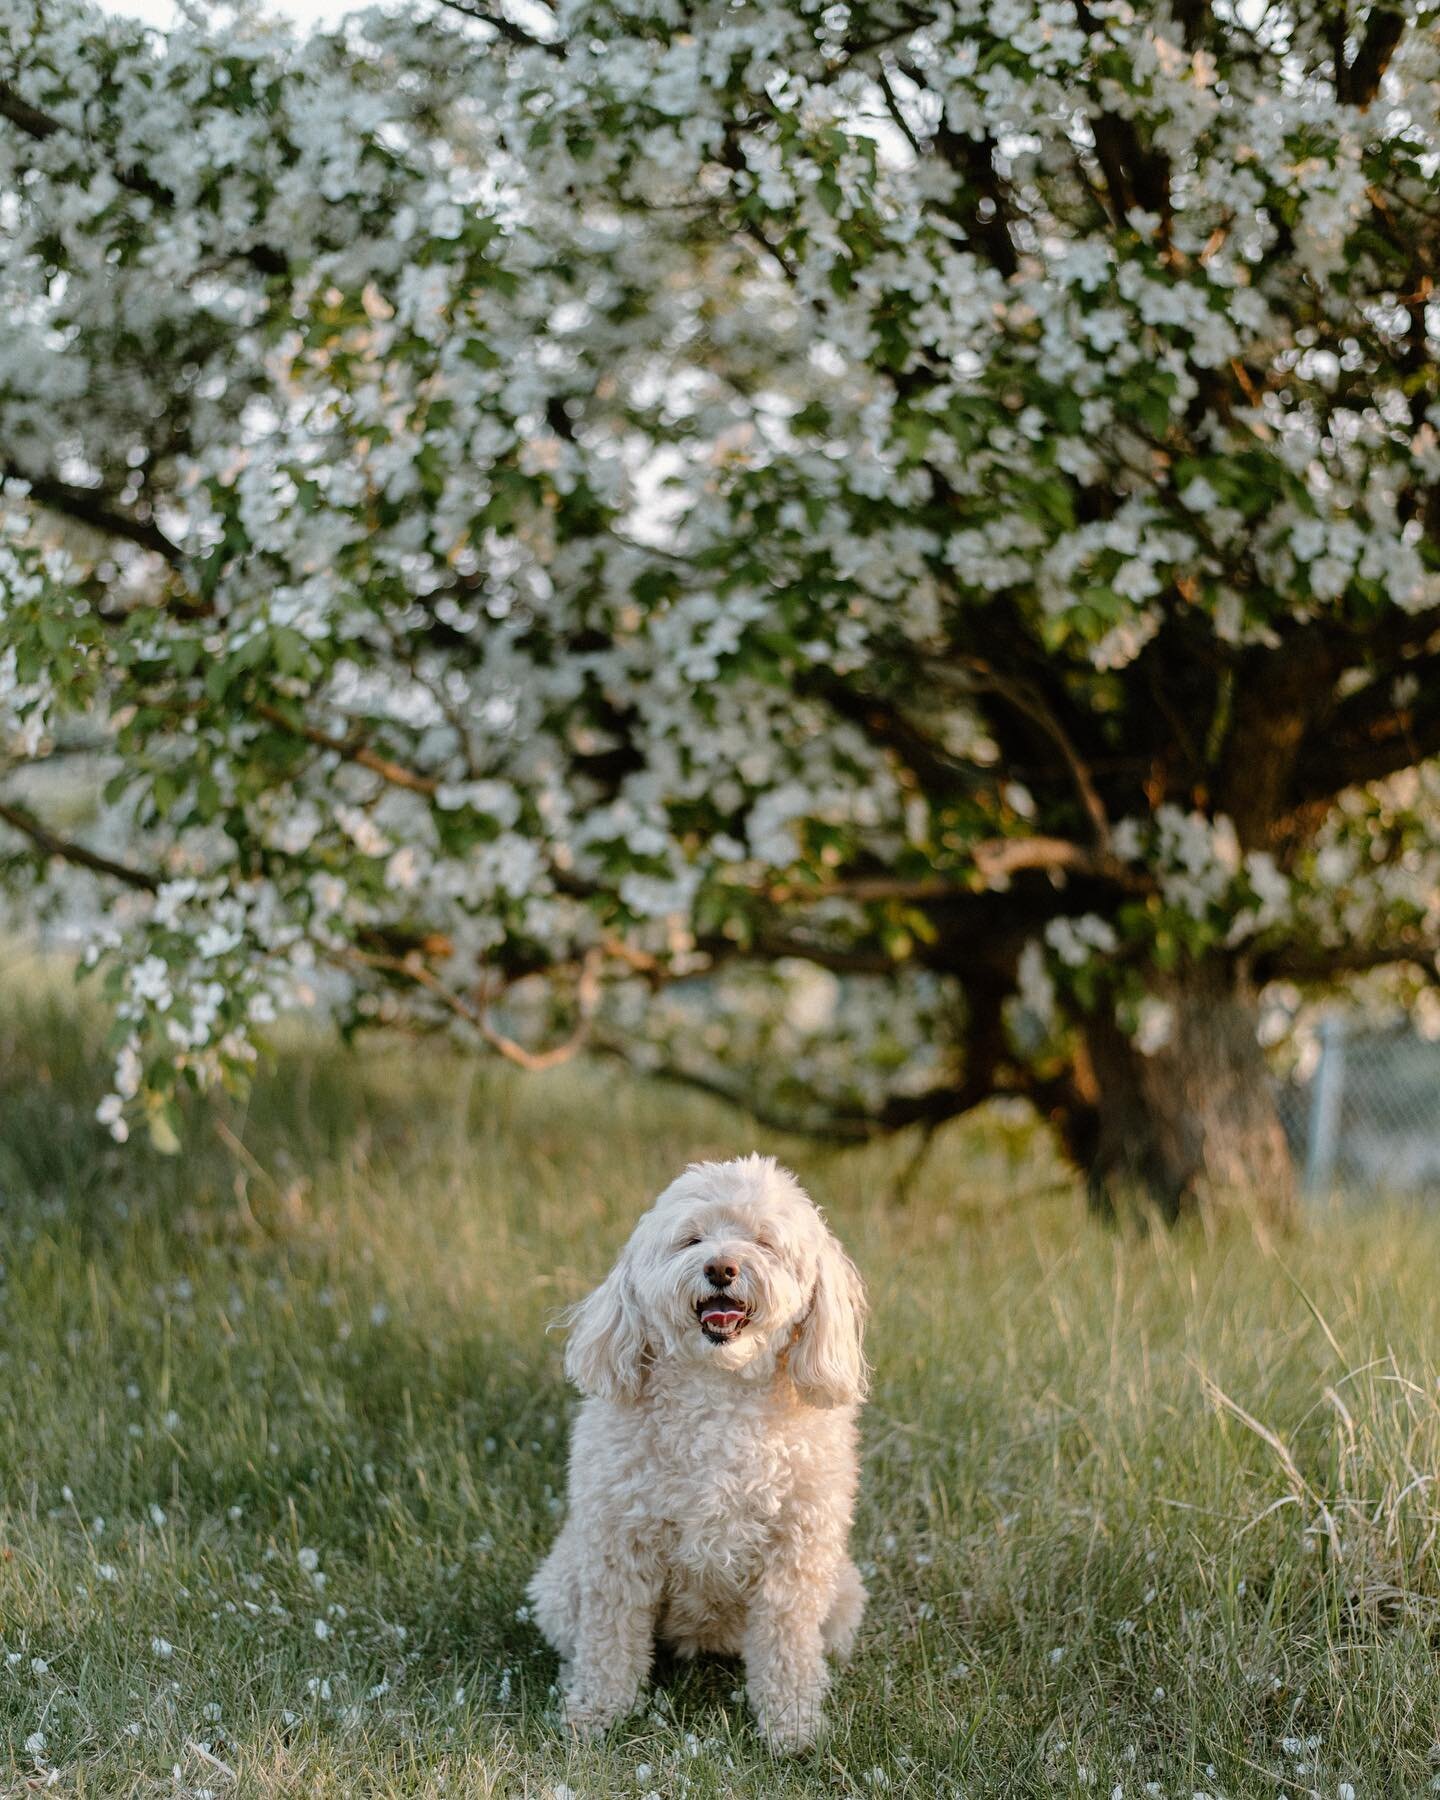 Bring me all your pups. That&rsquo;s it, that&rsquo;s the post.

What better way to get in some last photos of the cherry blossoms before they go away? 💖🐶